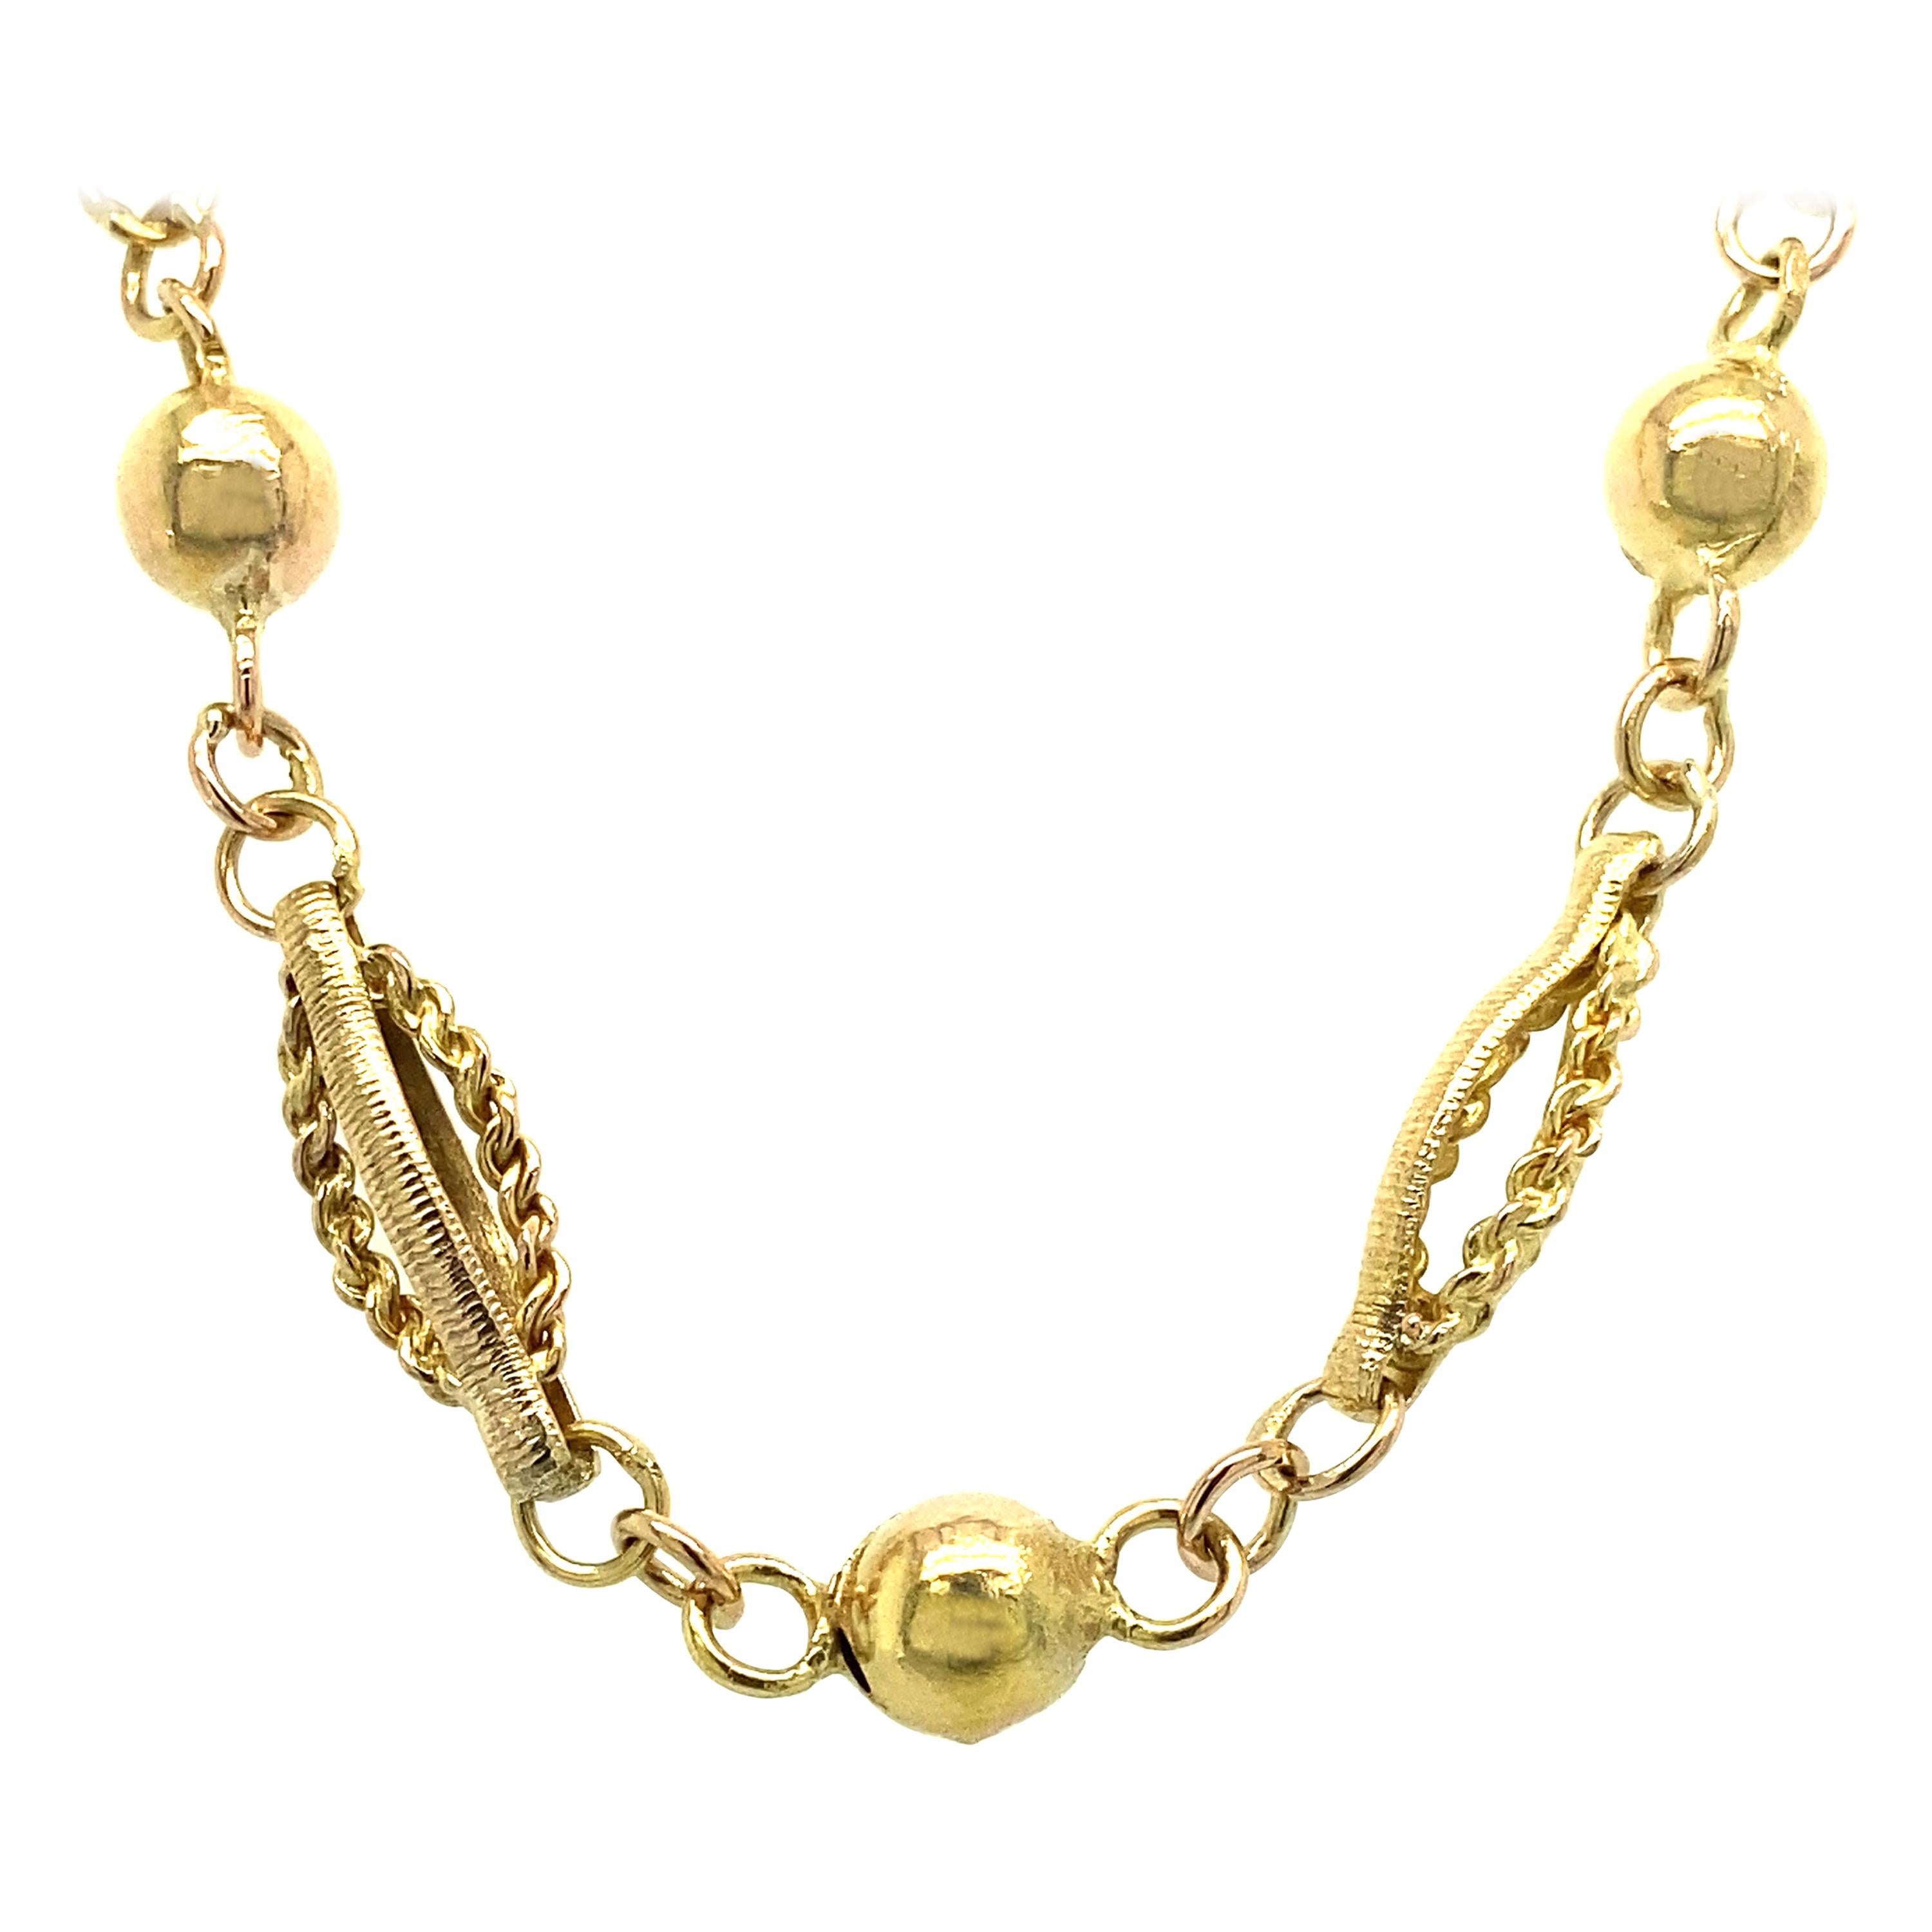 1950s Gold Necklace